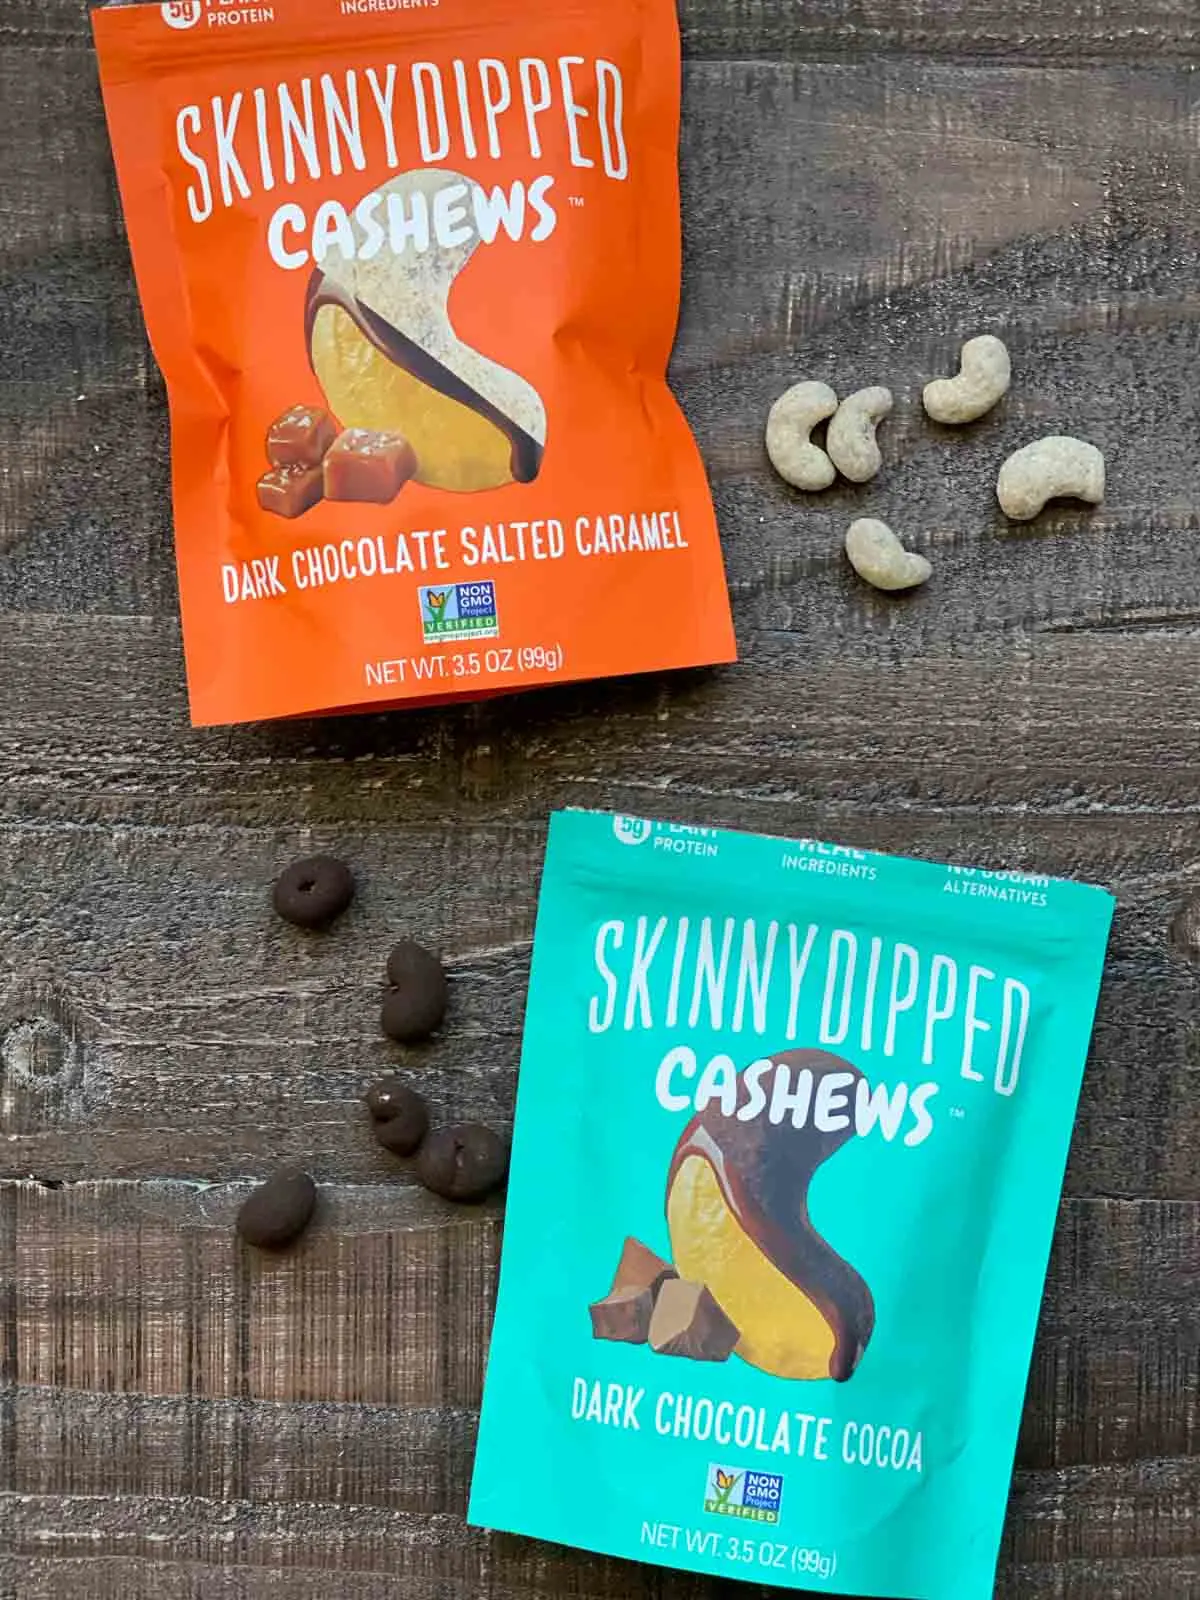 skinny dipped cashews salted caramel and dark chocolate cocoa